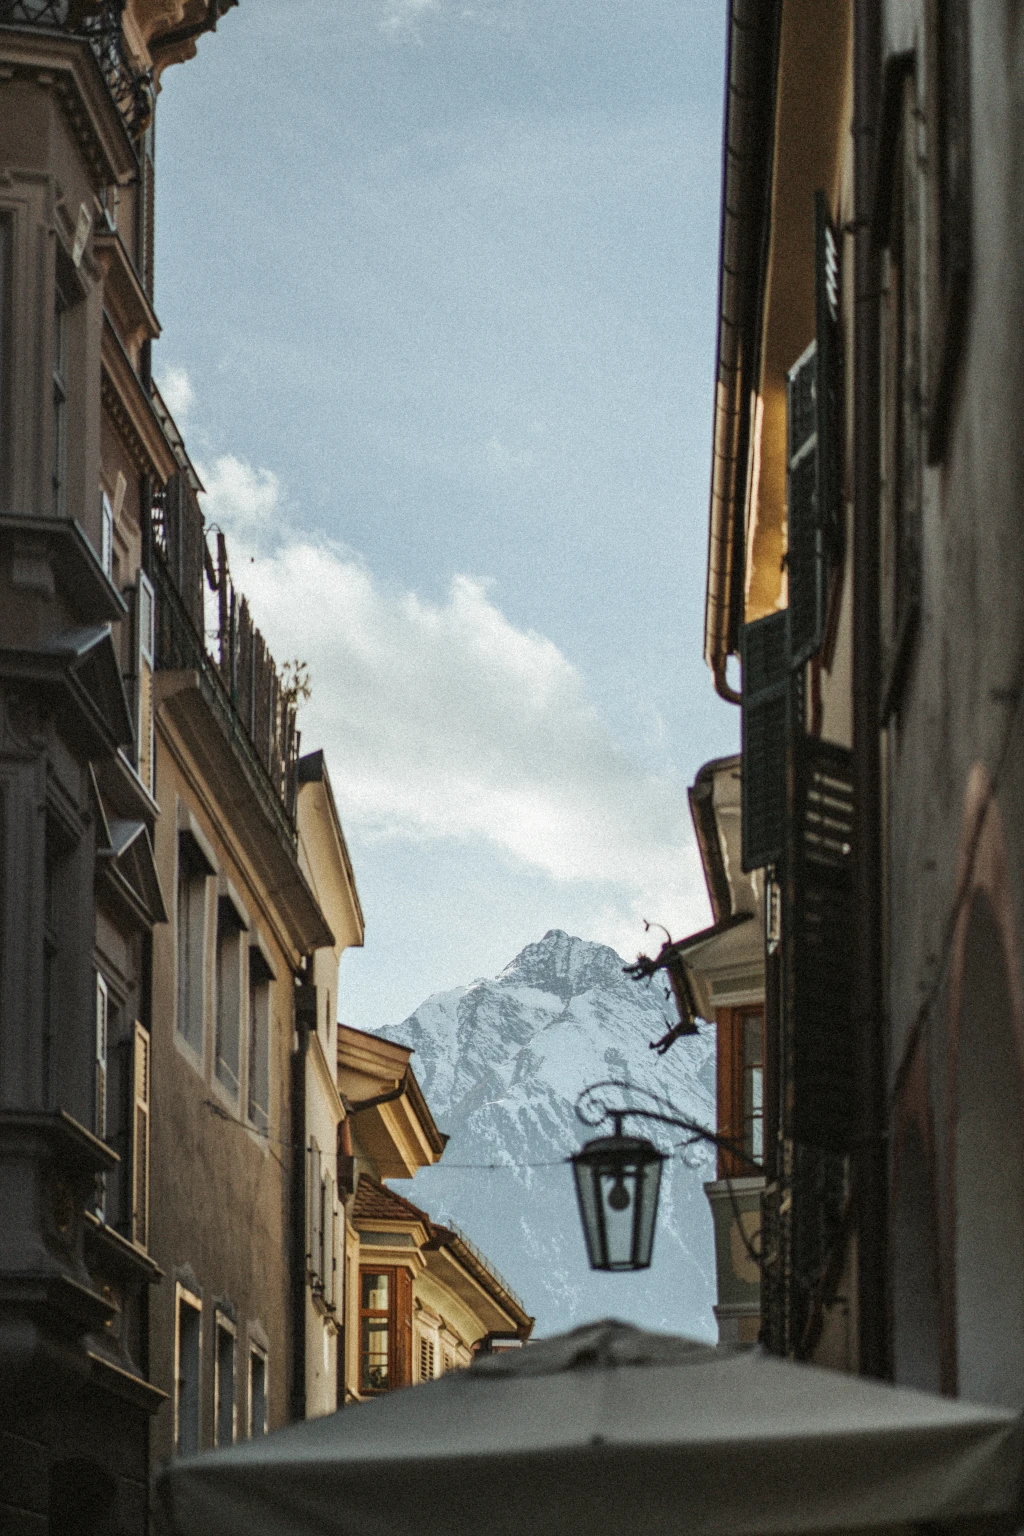 "Explore the historic charm and cultural treasures of Merano with our stunning photos of local landmarks, architecture, and traditions. Our images will inspire you to discover the rich history and unique character of this fascinating region."